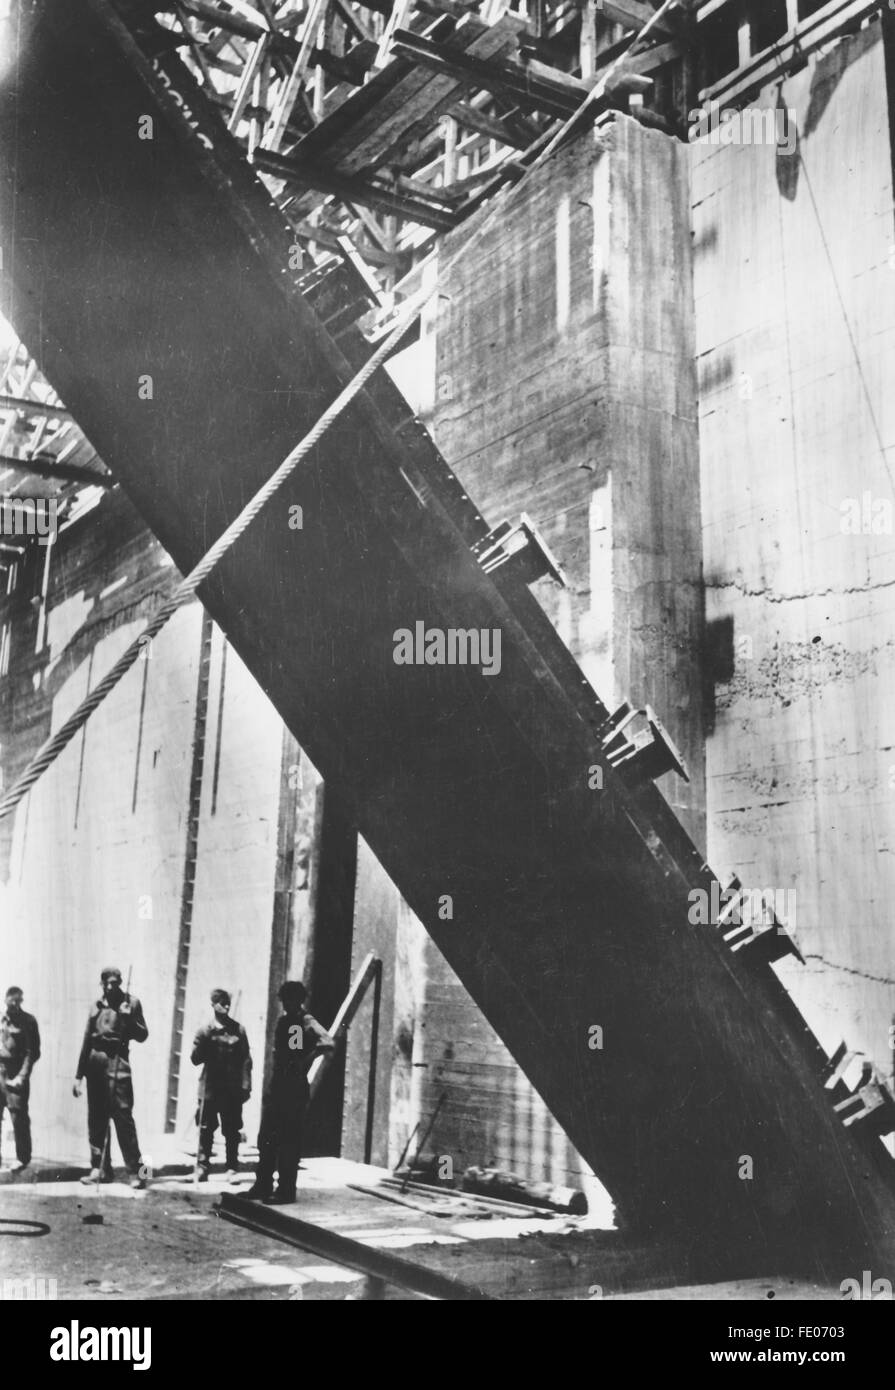 The Nazi propaganda picture shows a submarine pen at the Atlantic Wall built by the Todt Organisation for the protection of the German nacy. The photo was taken in February 1942. Fotoarchiv für Zeitgeschichtee - NO WIRE SERVICE - Stock Photo